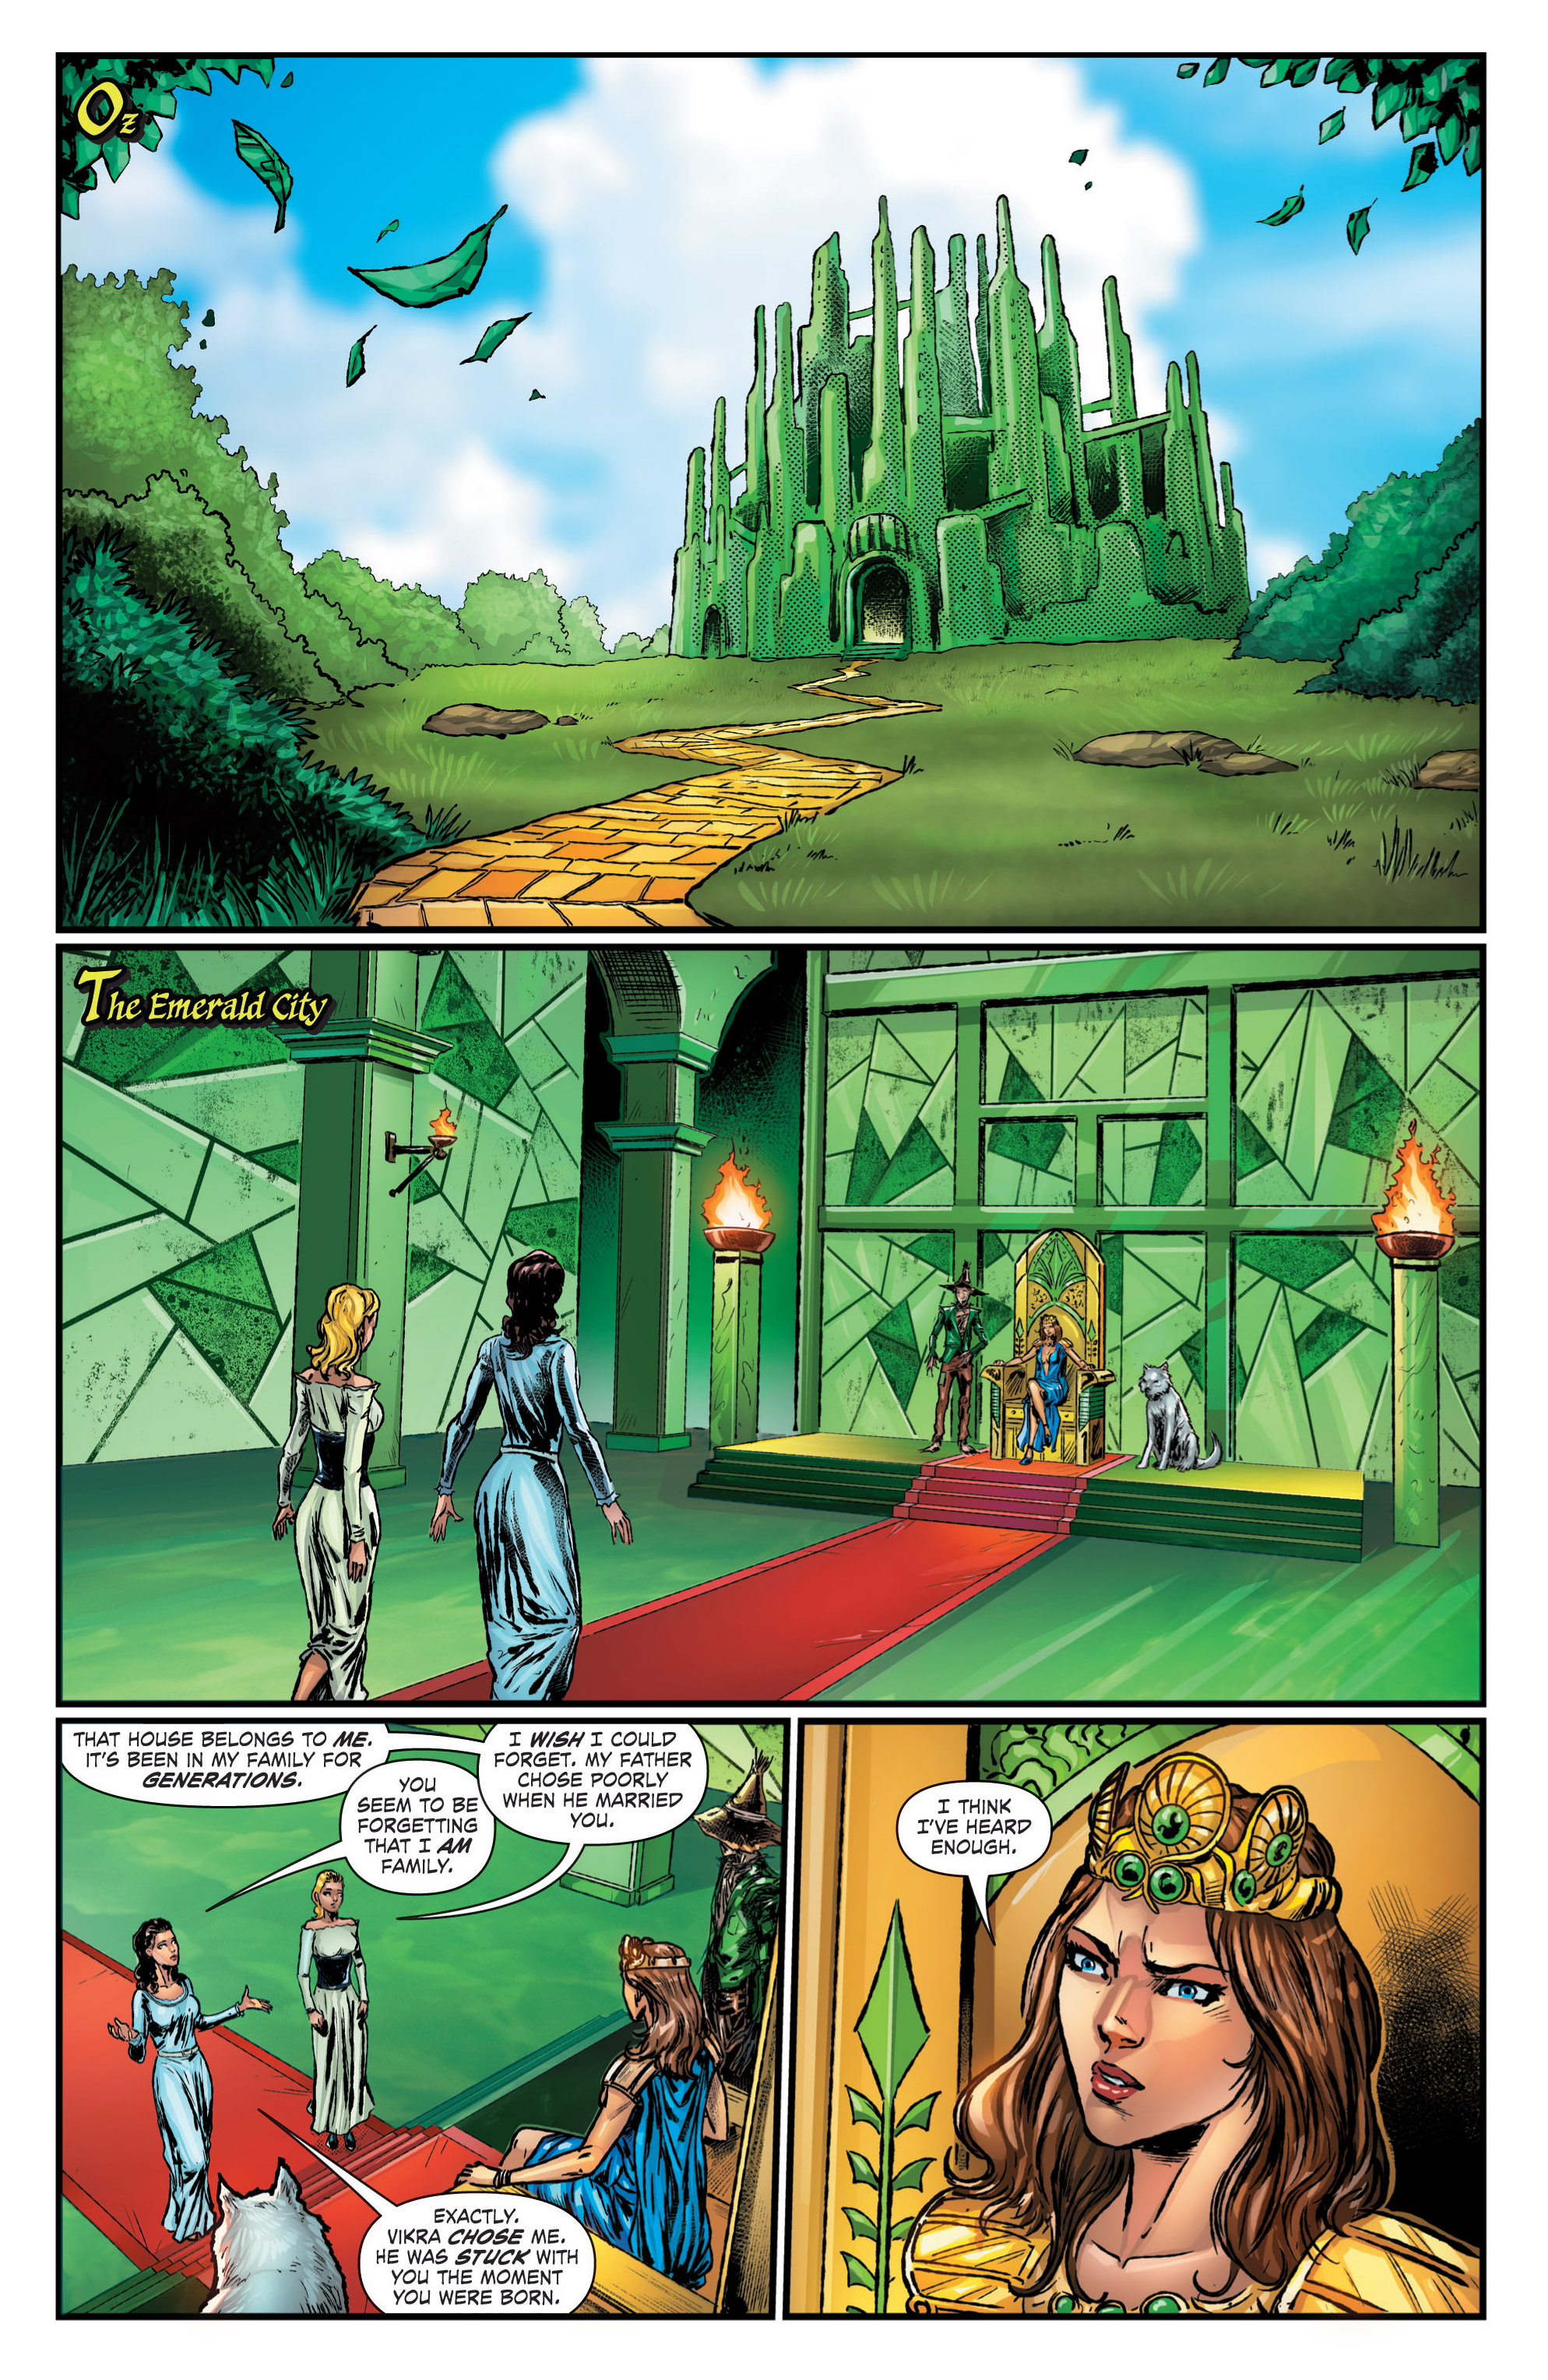 Oz 2021 Annual: Patchwork Girl (2021): Chapter 1 - Page 3